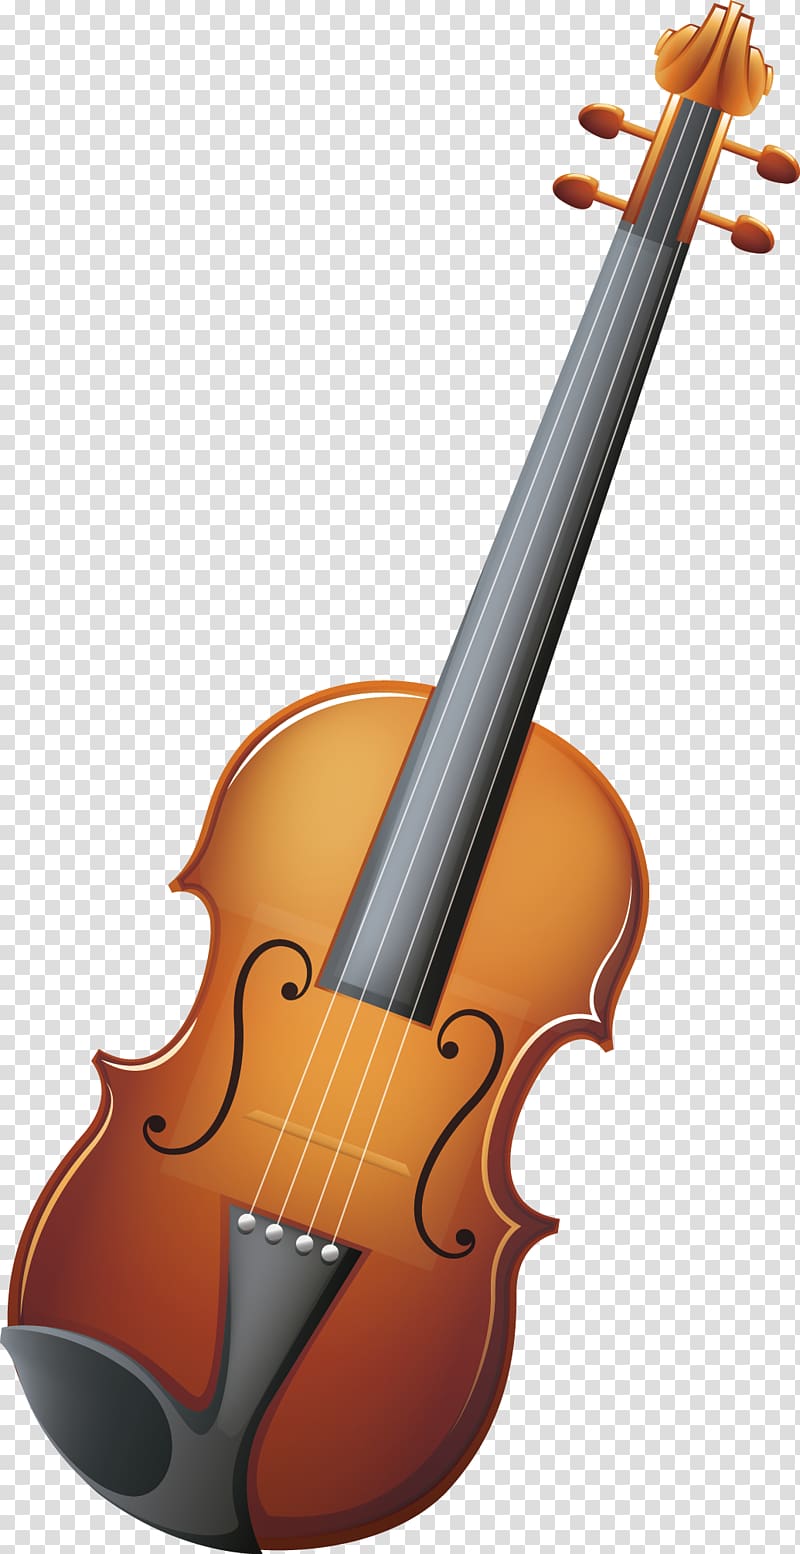 Bass violin Violone Double bass Viola, violin transparent background PNG clipart